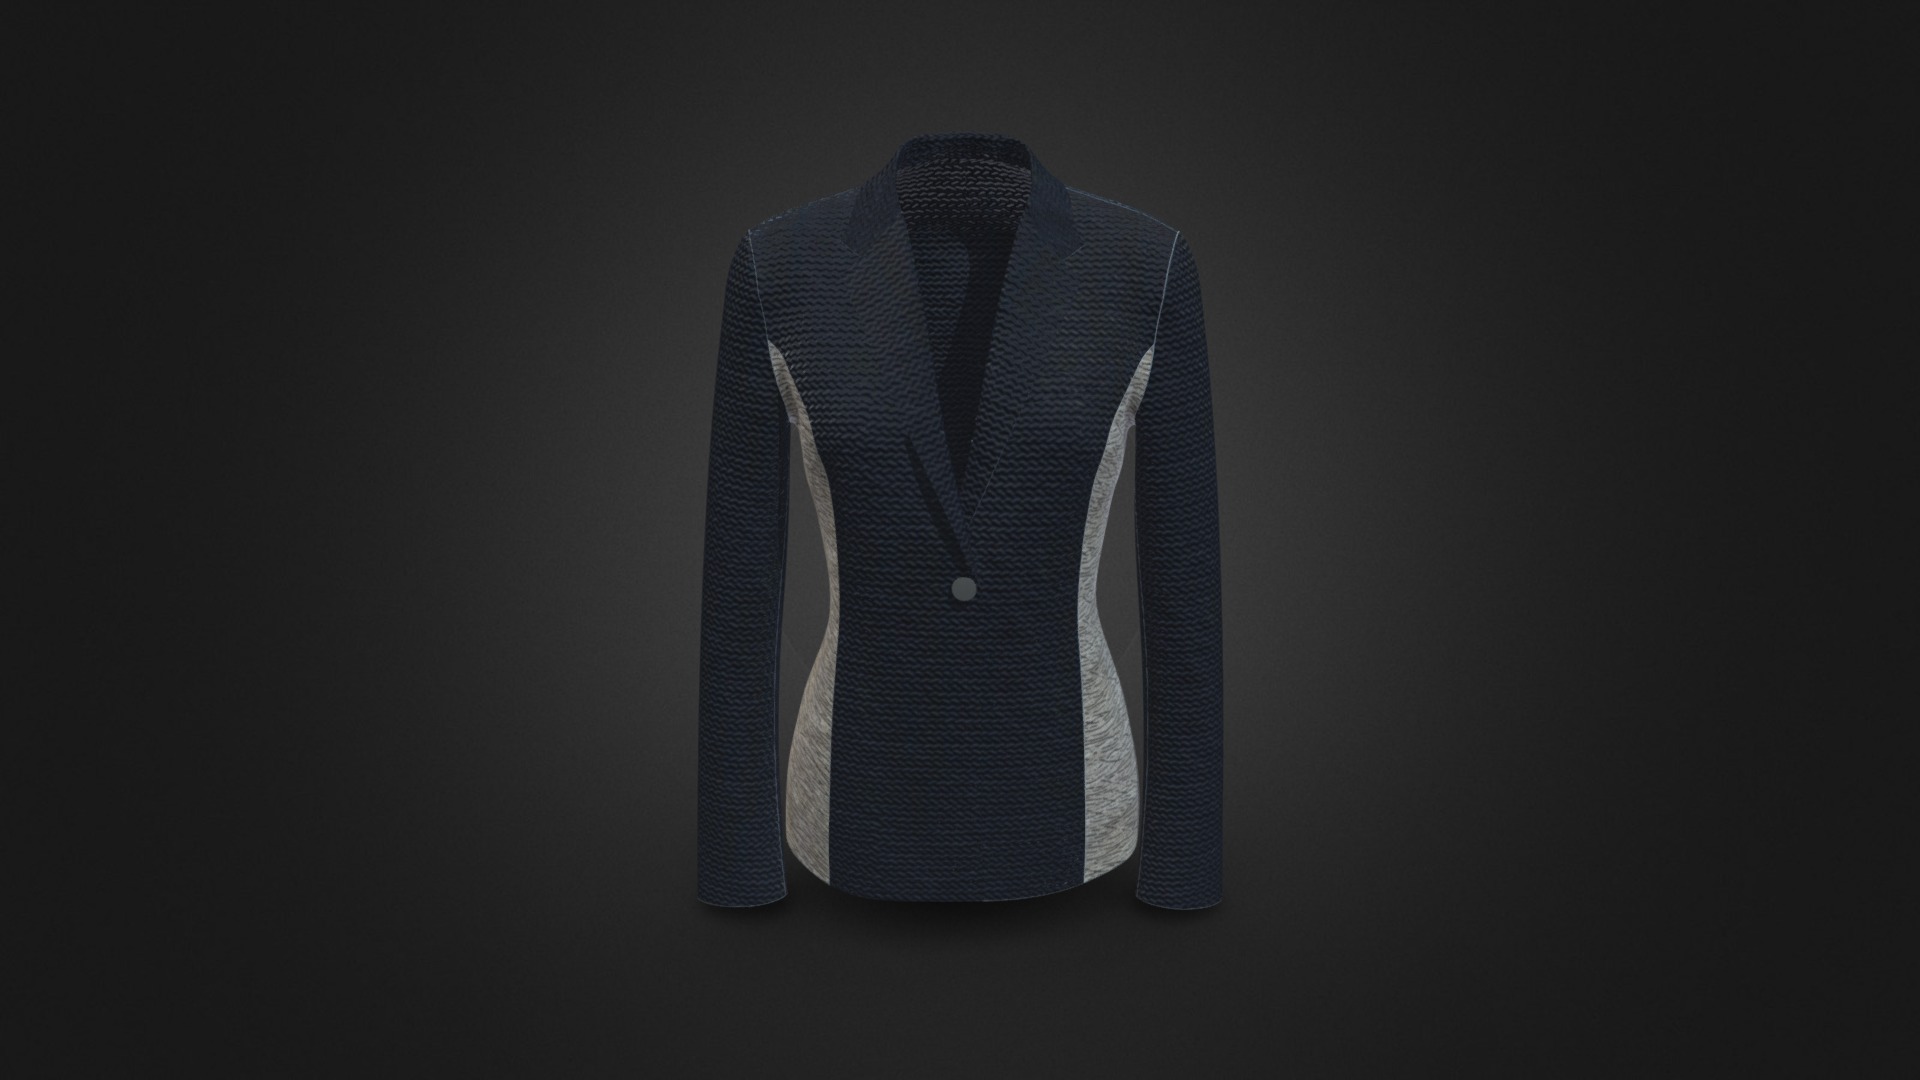 3D model ONE BUTTON JACKET - This is a 3D model of the ONE BUTTON JACKET. The 3D model is about a grey and white striped shirt.